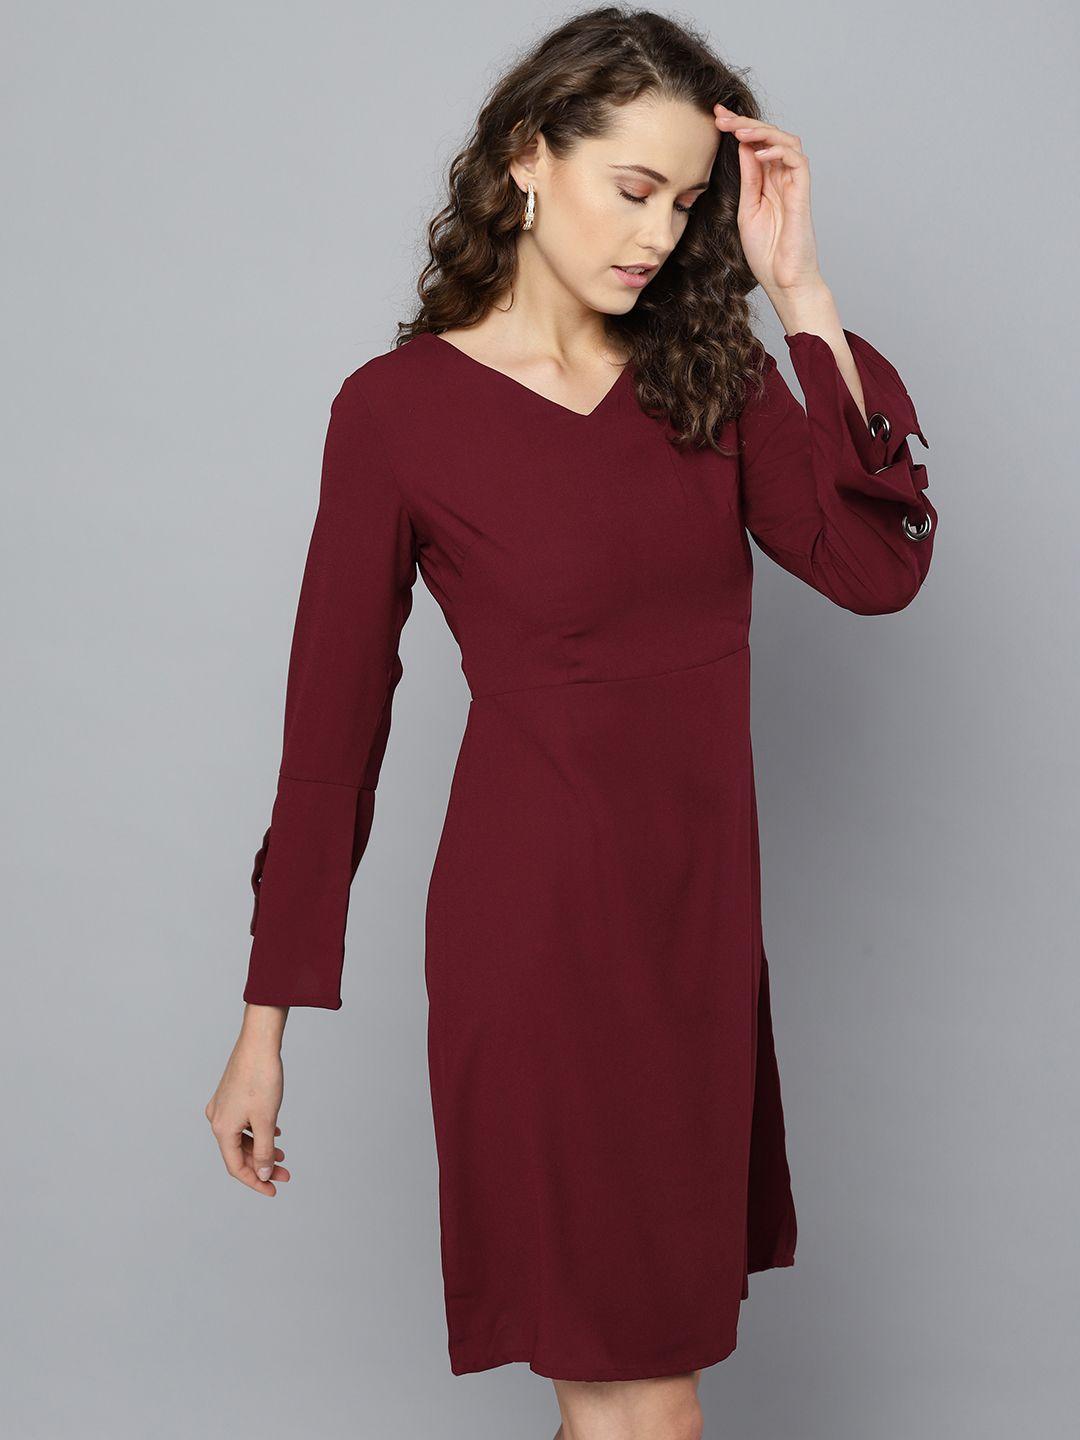 marie claire women burgundy solid a-line dress